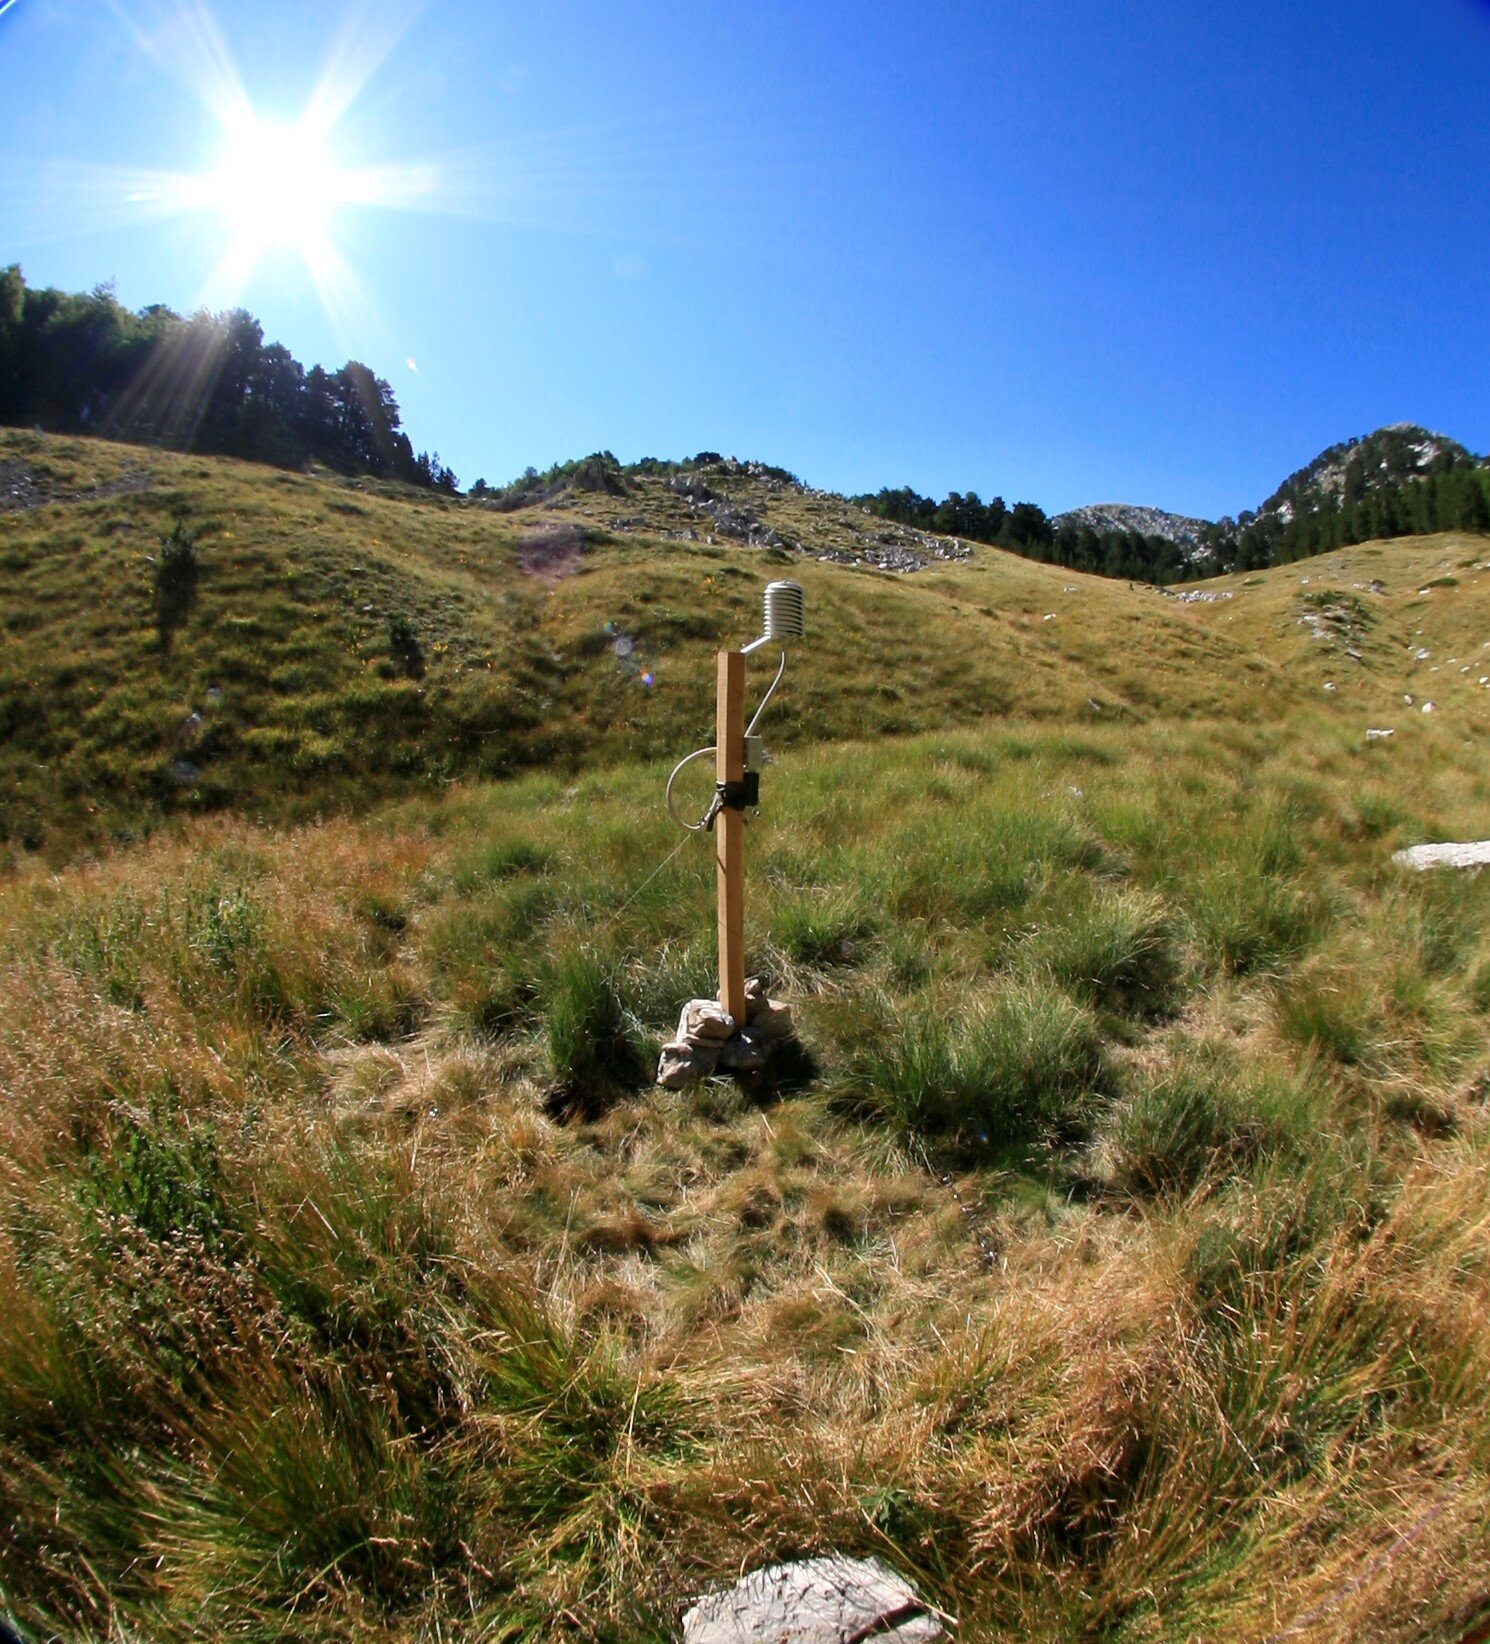 MeteoShield Pro as part of a Climatological Station on Mt Orjen in Montenegro by Pavle Cikovac